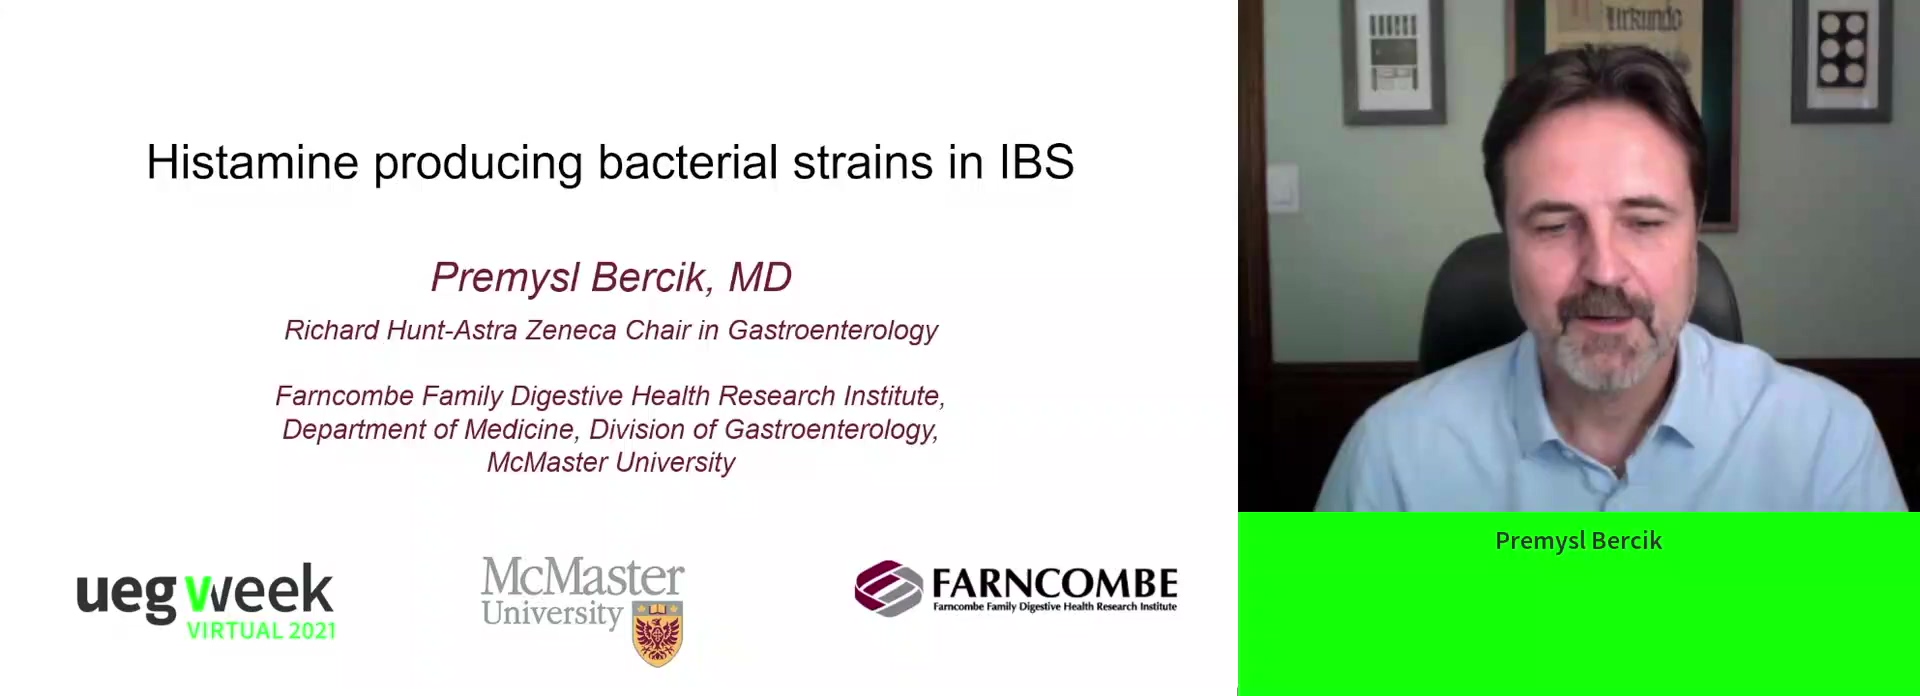 Histamine producing bacterial strains in IBS